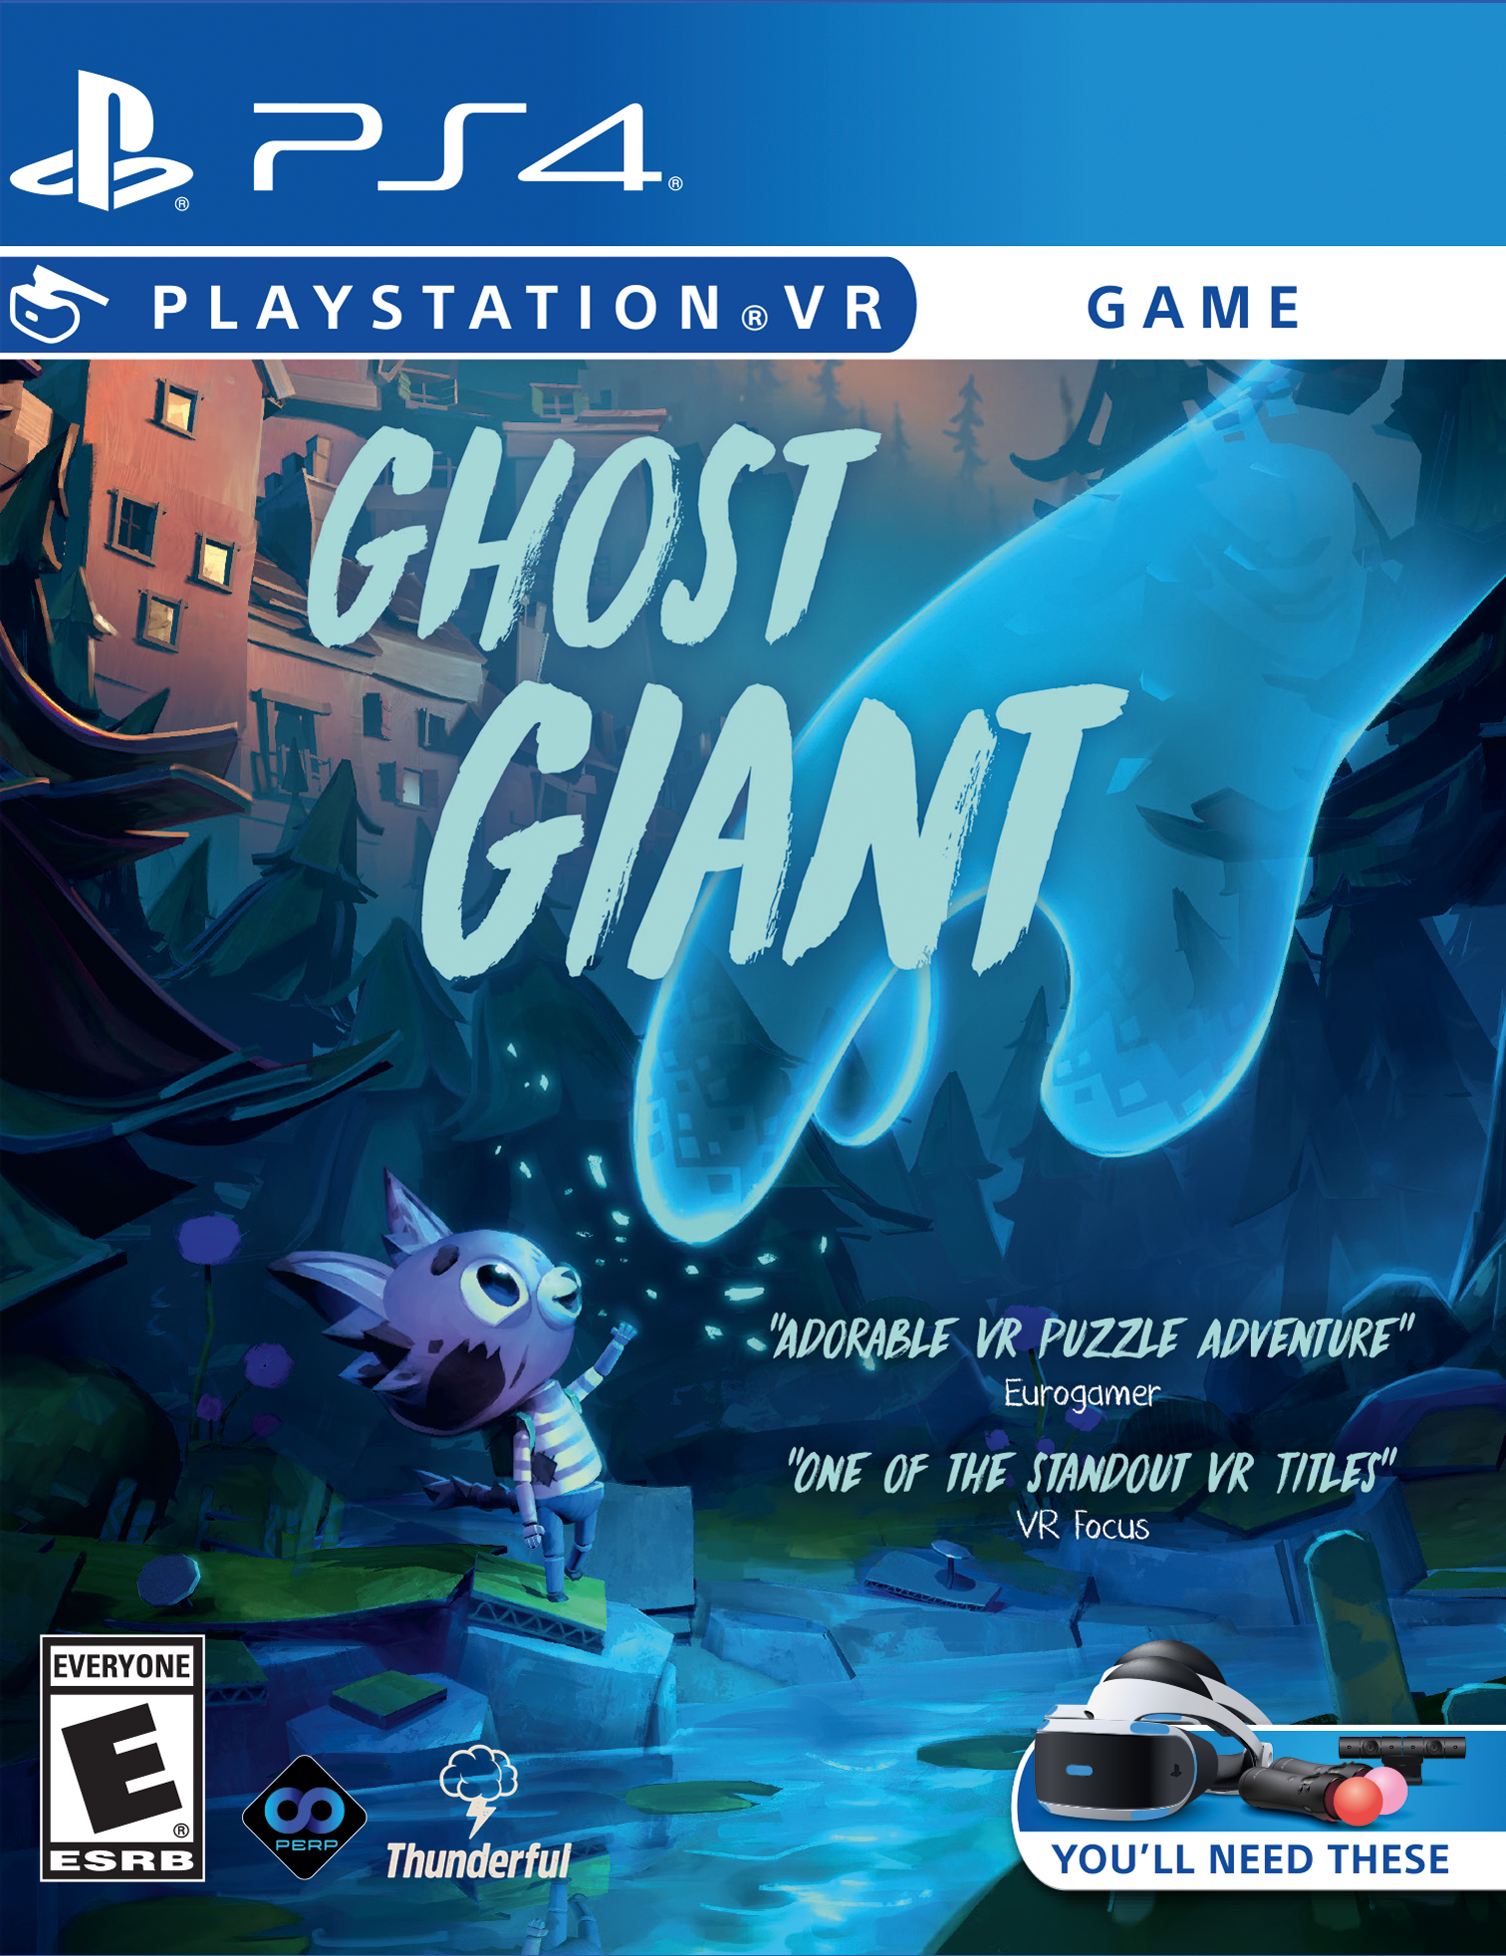 download ghost giant